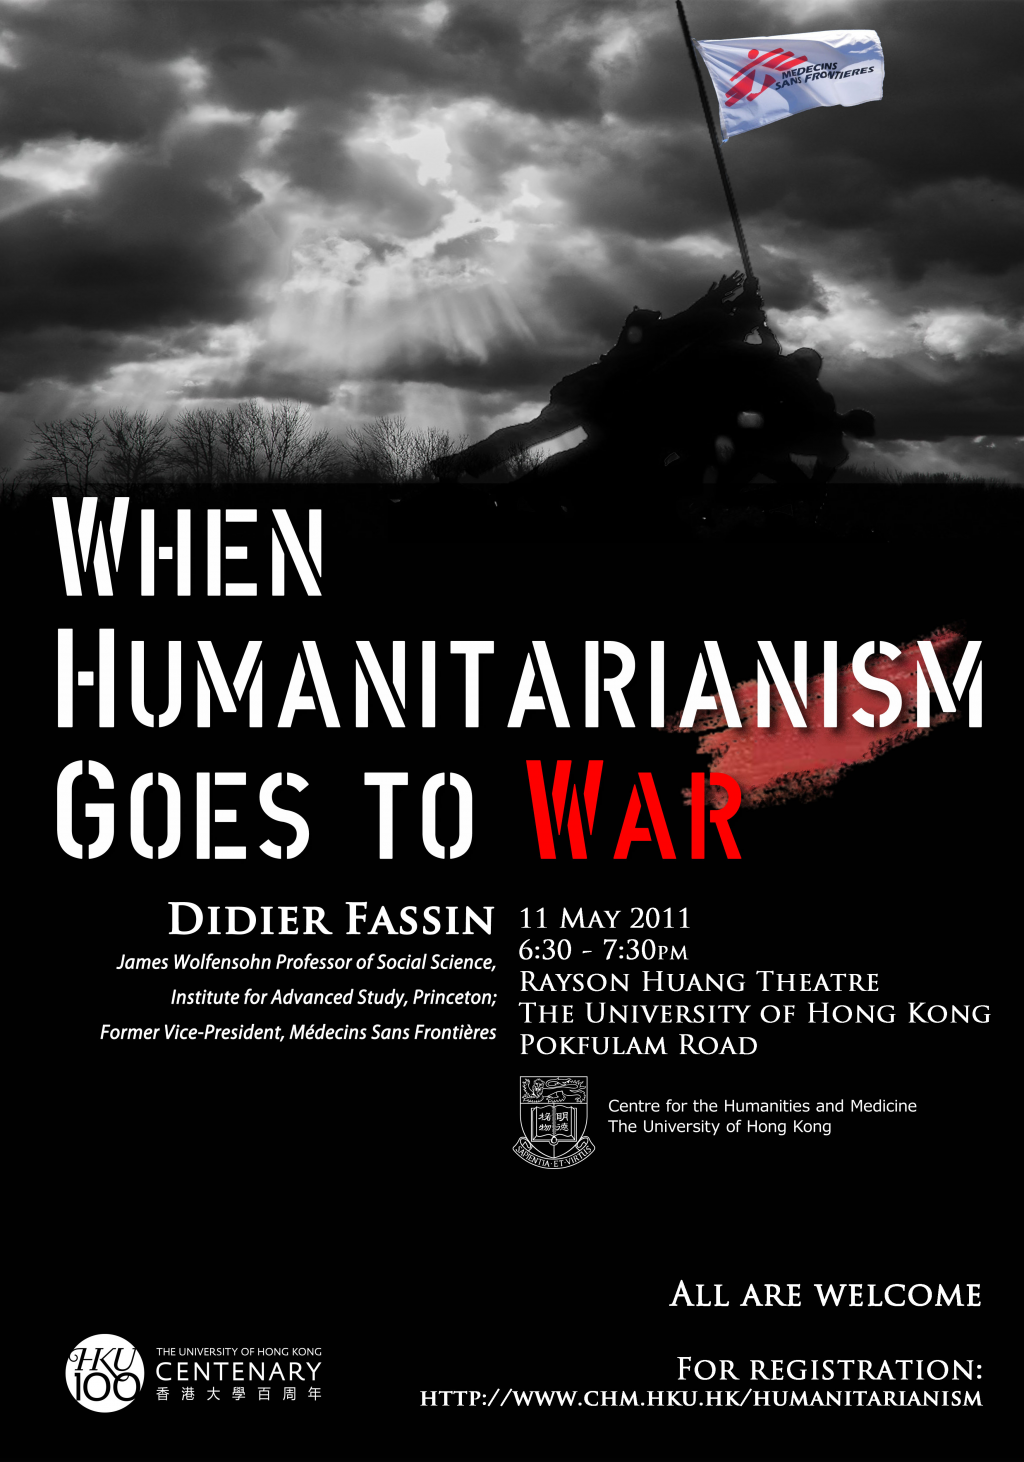 When Humanitarianism Goes to War by Prof Didier Fassin